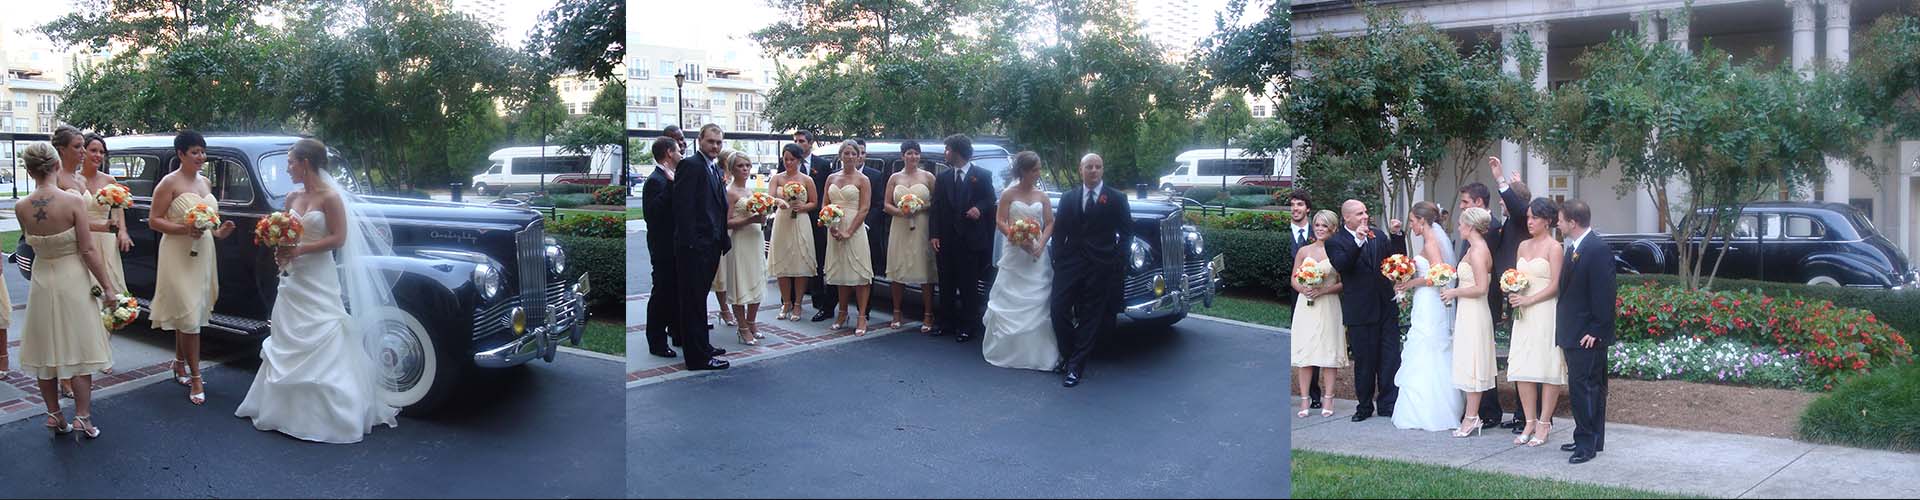 Classic Car Wedding Packages